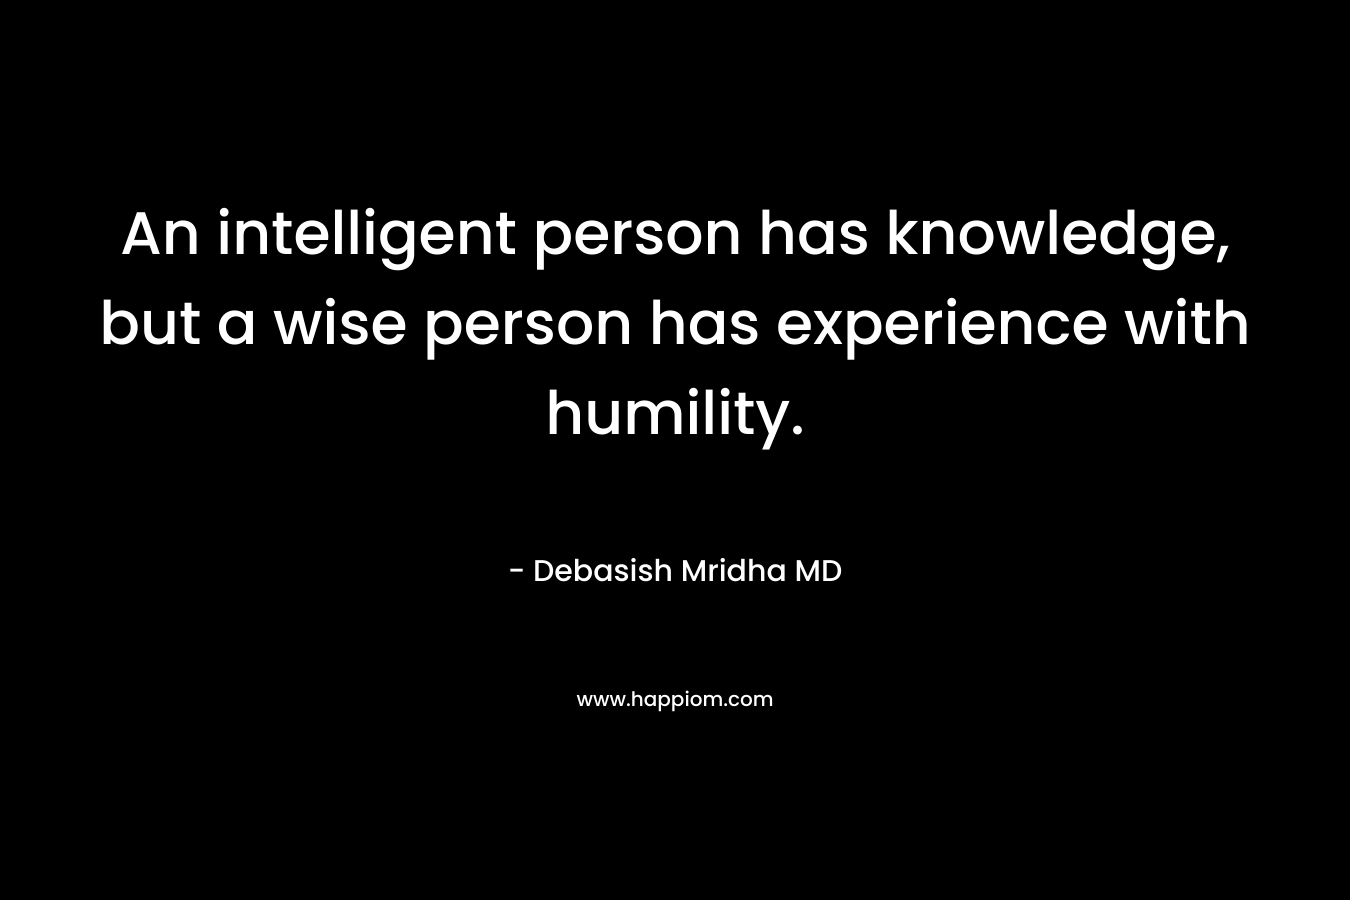 An intelligent person has knowledge, but a wise person has experience with humility.